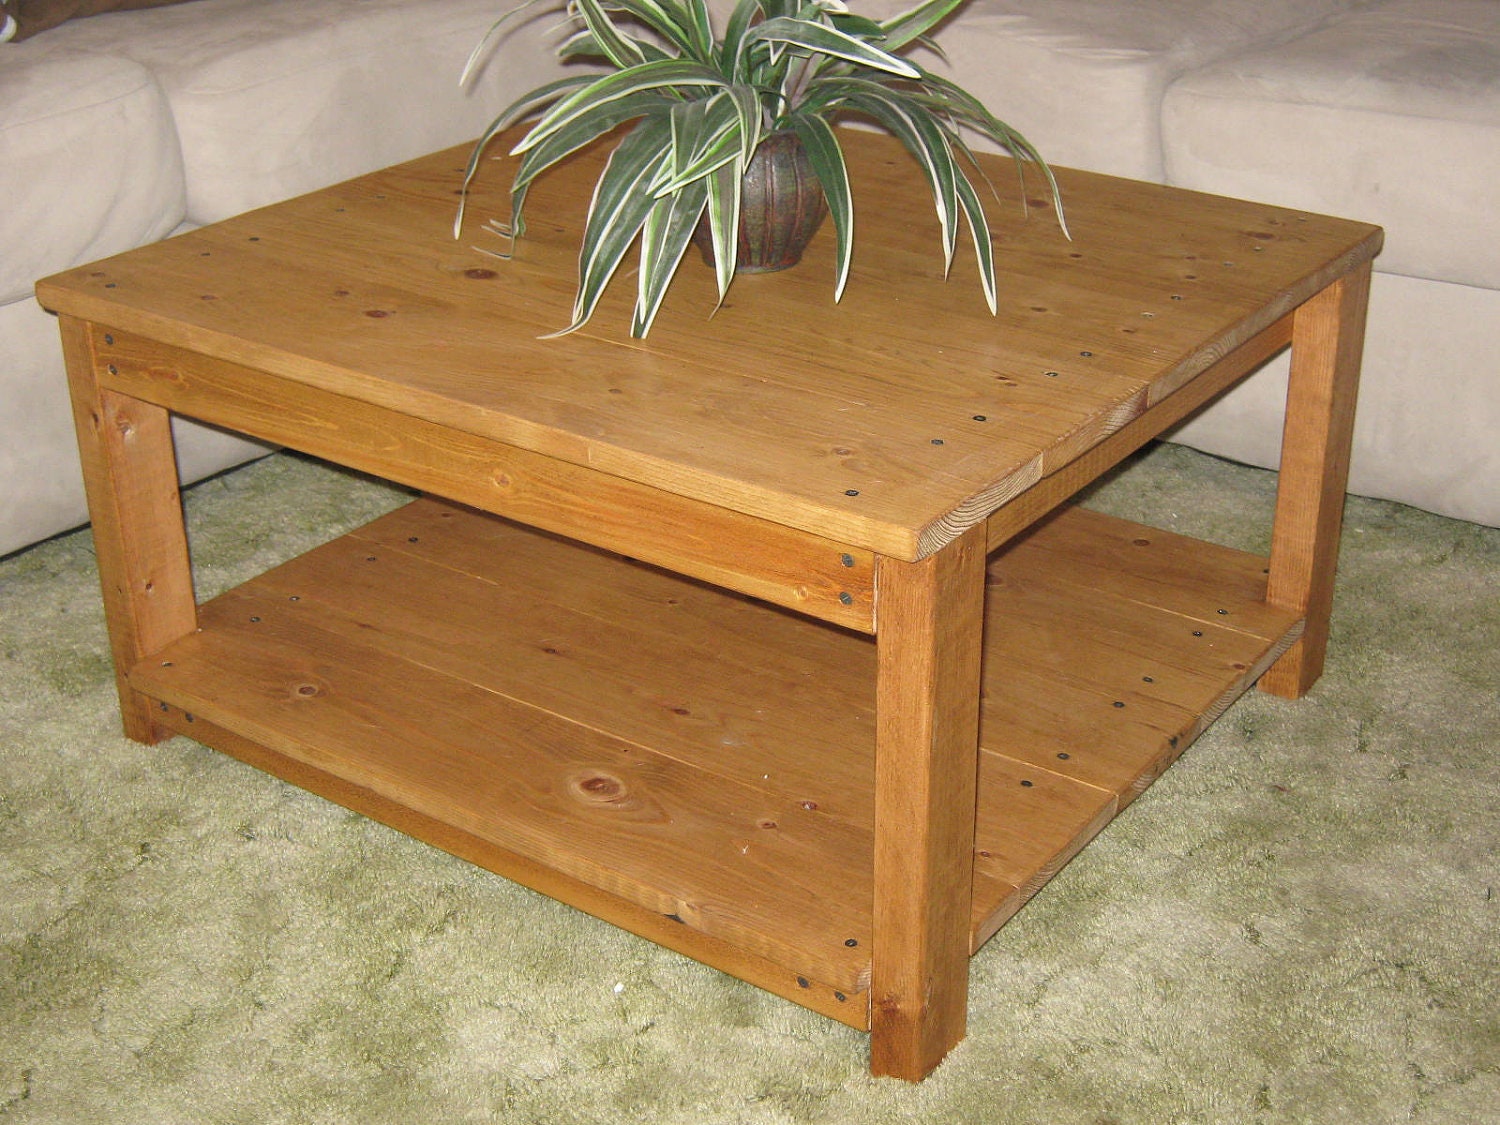 DIY PLANS to make Square Wooden Coffee Table by wingstoshop